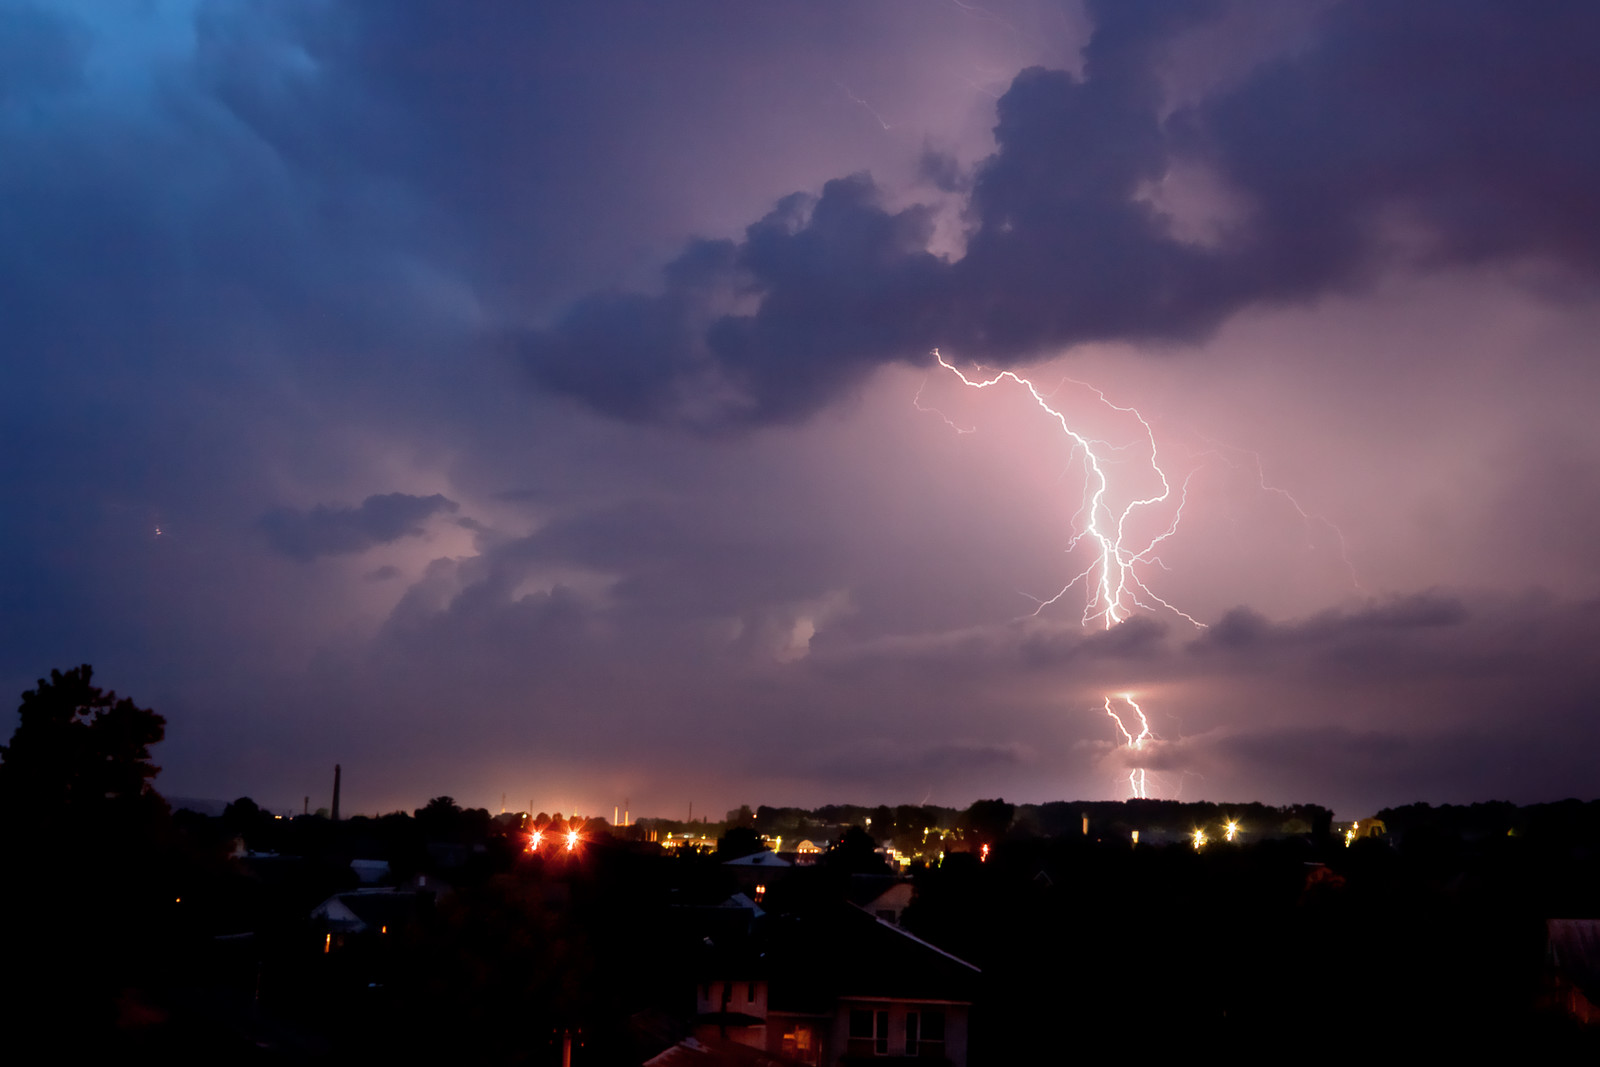 5 Ways to Get Your House Ready for Severe Storms - Storm brewing image